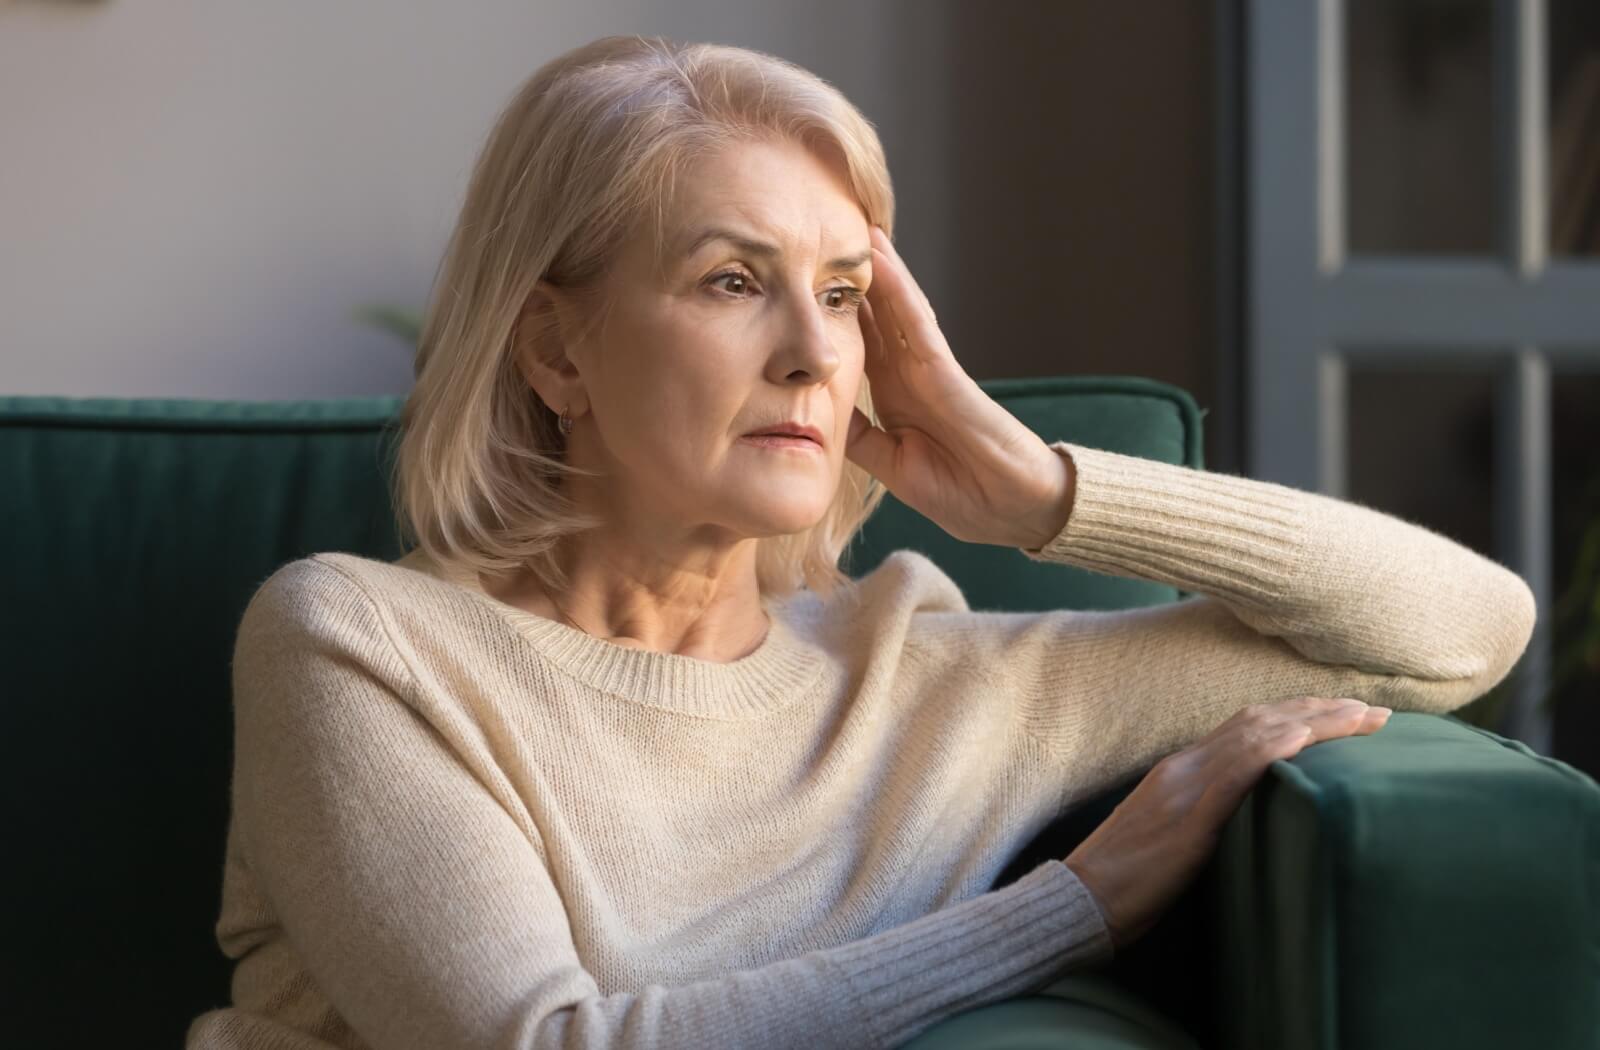 An older adult woman looking confused and anxious while staring at a distance.